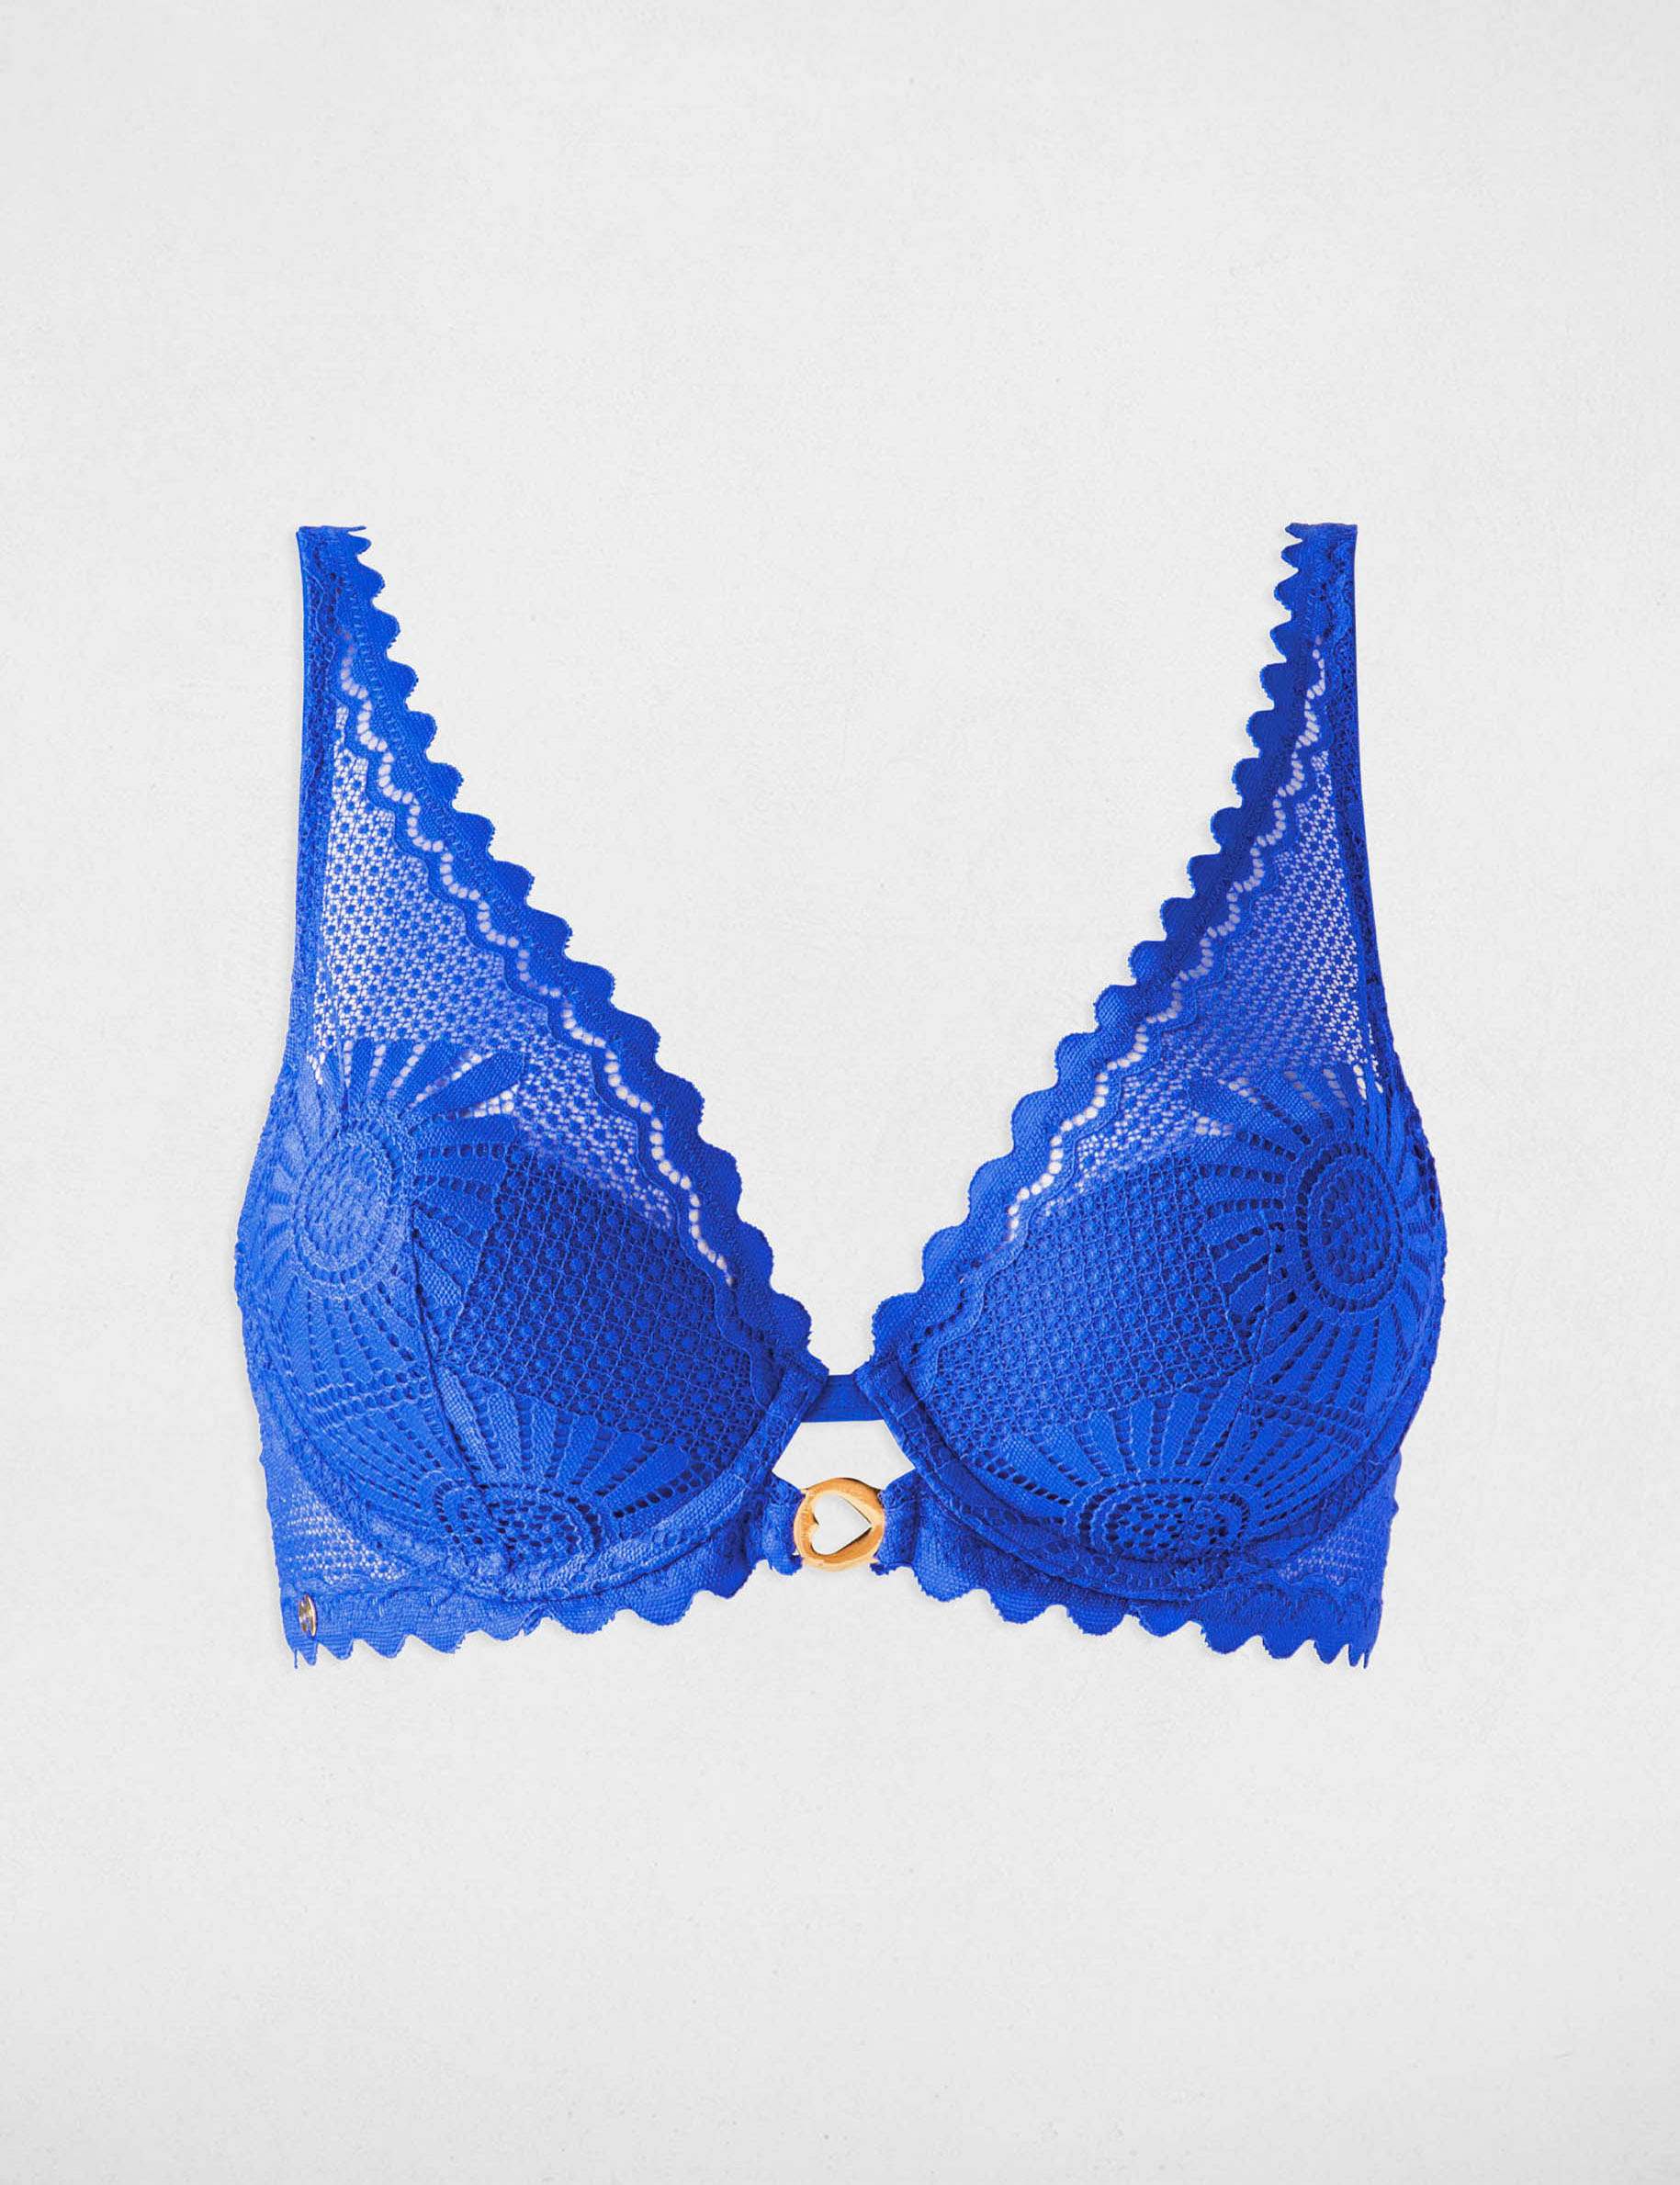 AERIE Brooke royal blue lace padded underwire pushup bra